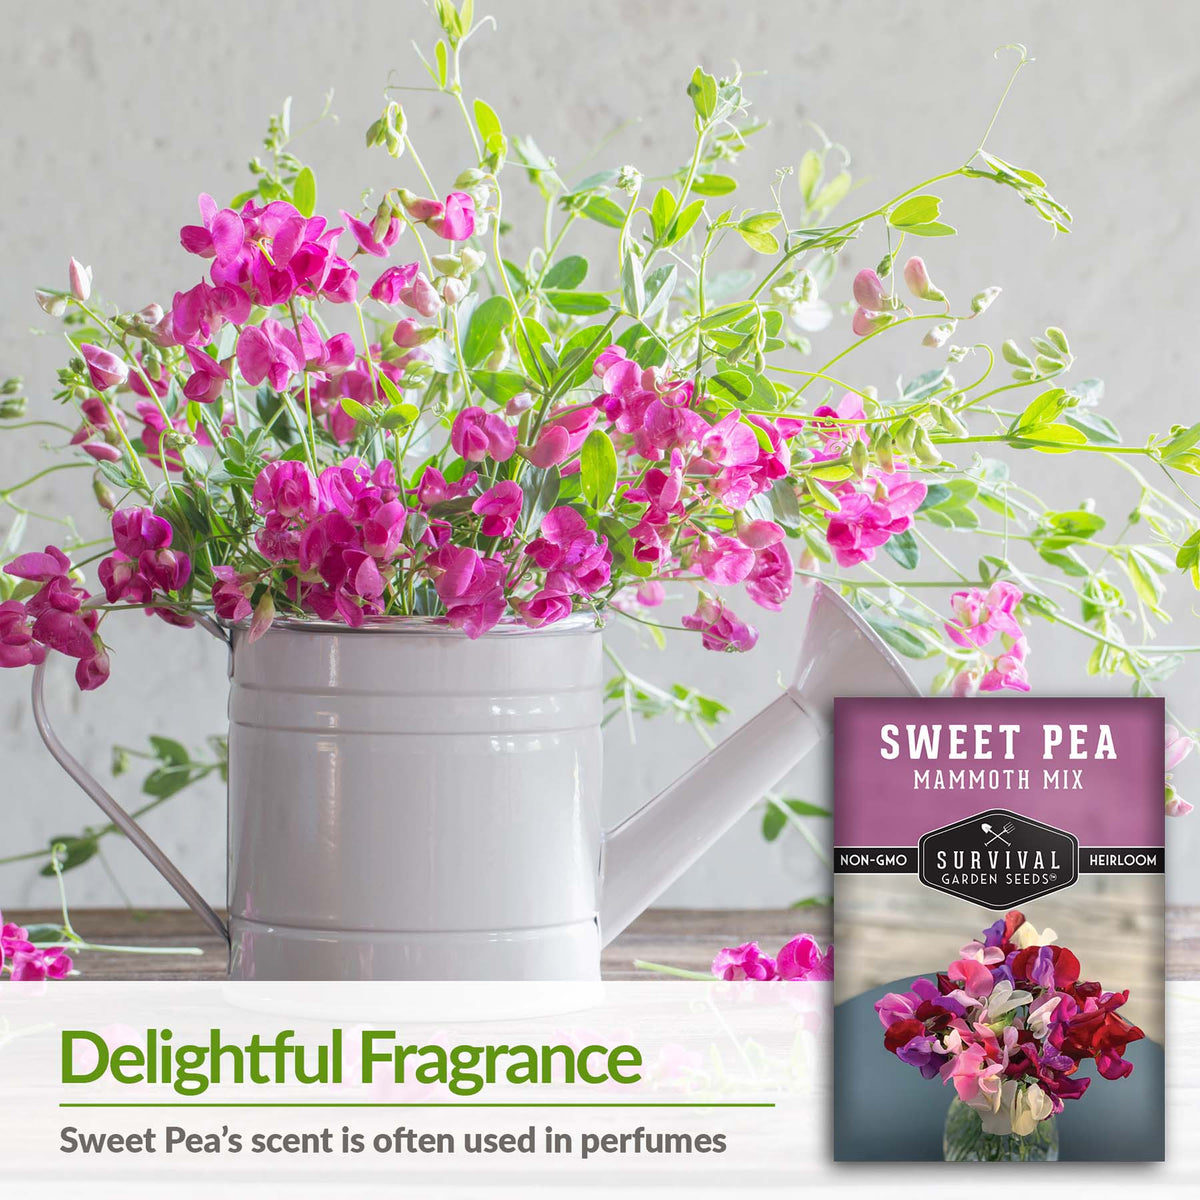 Sweet Pea flowers have a delightful fragrance